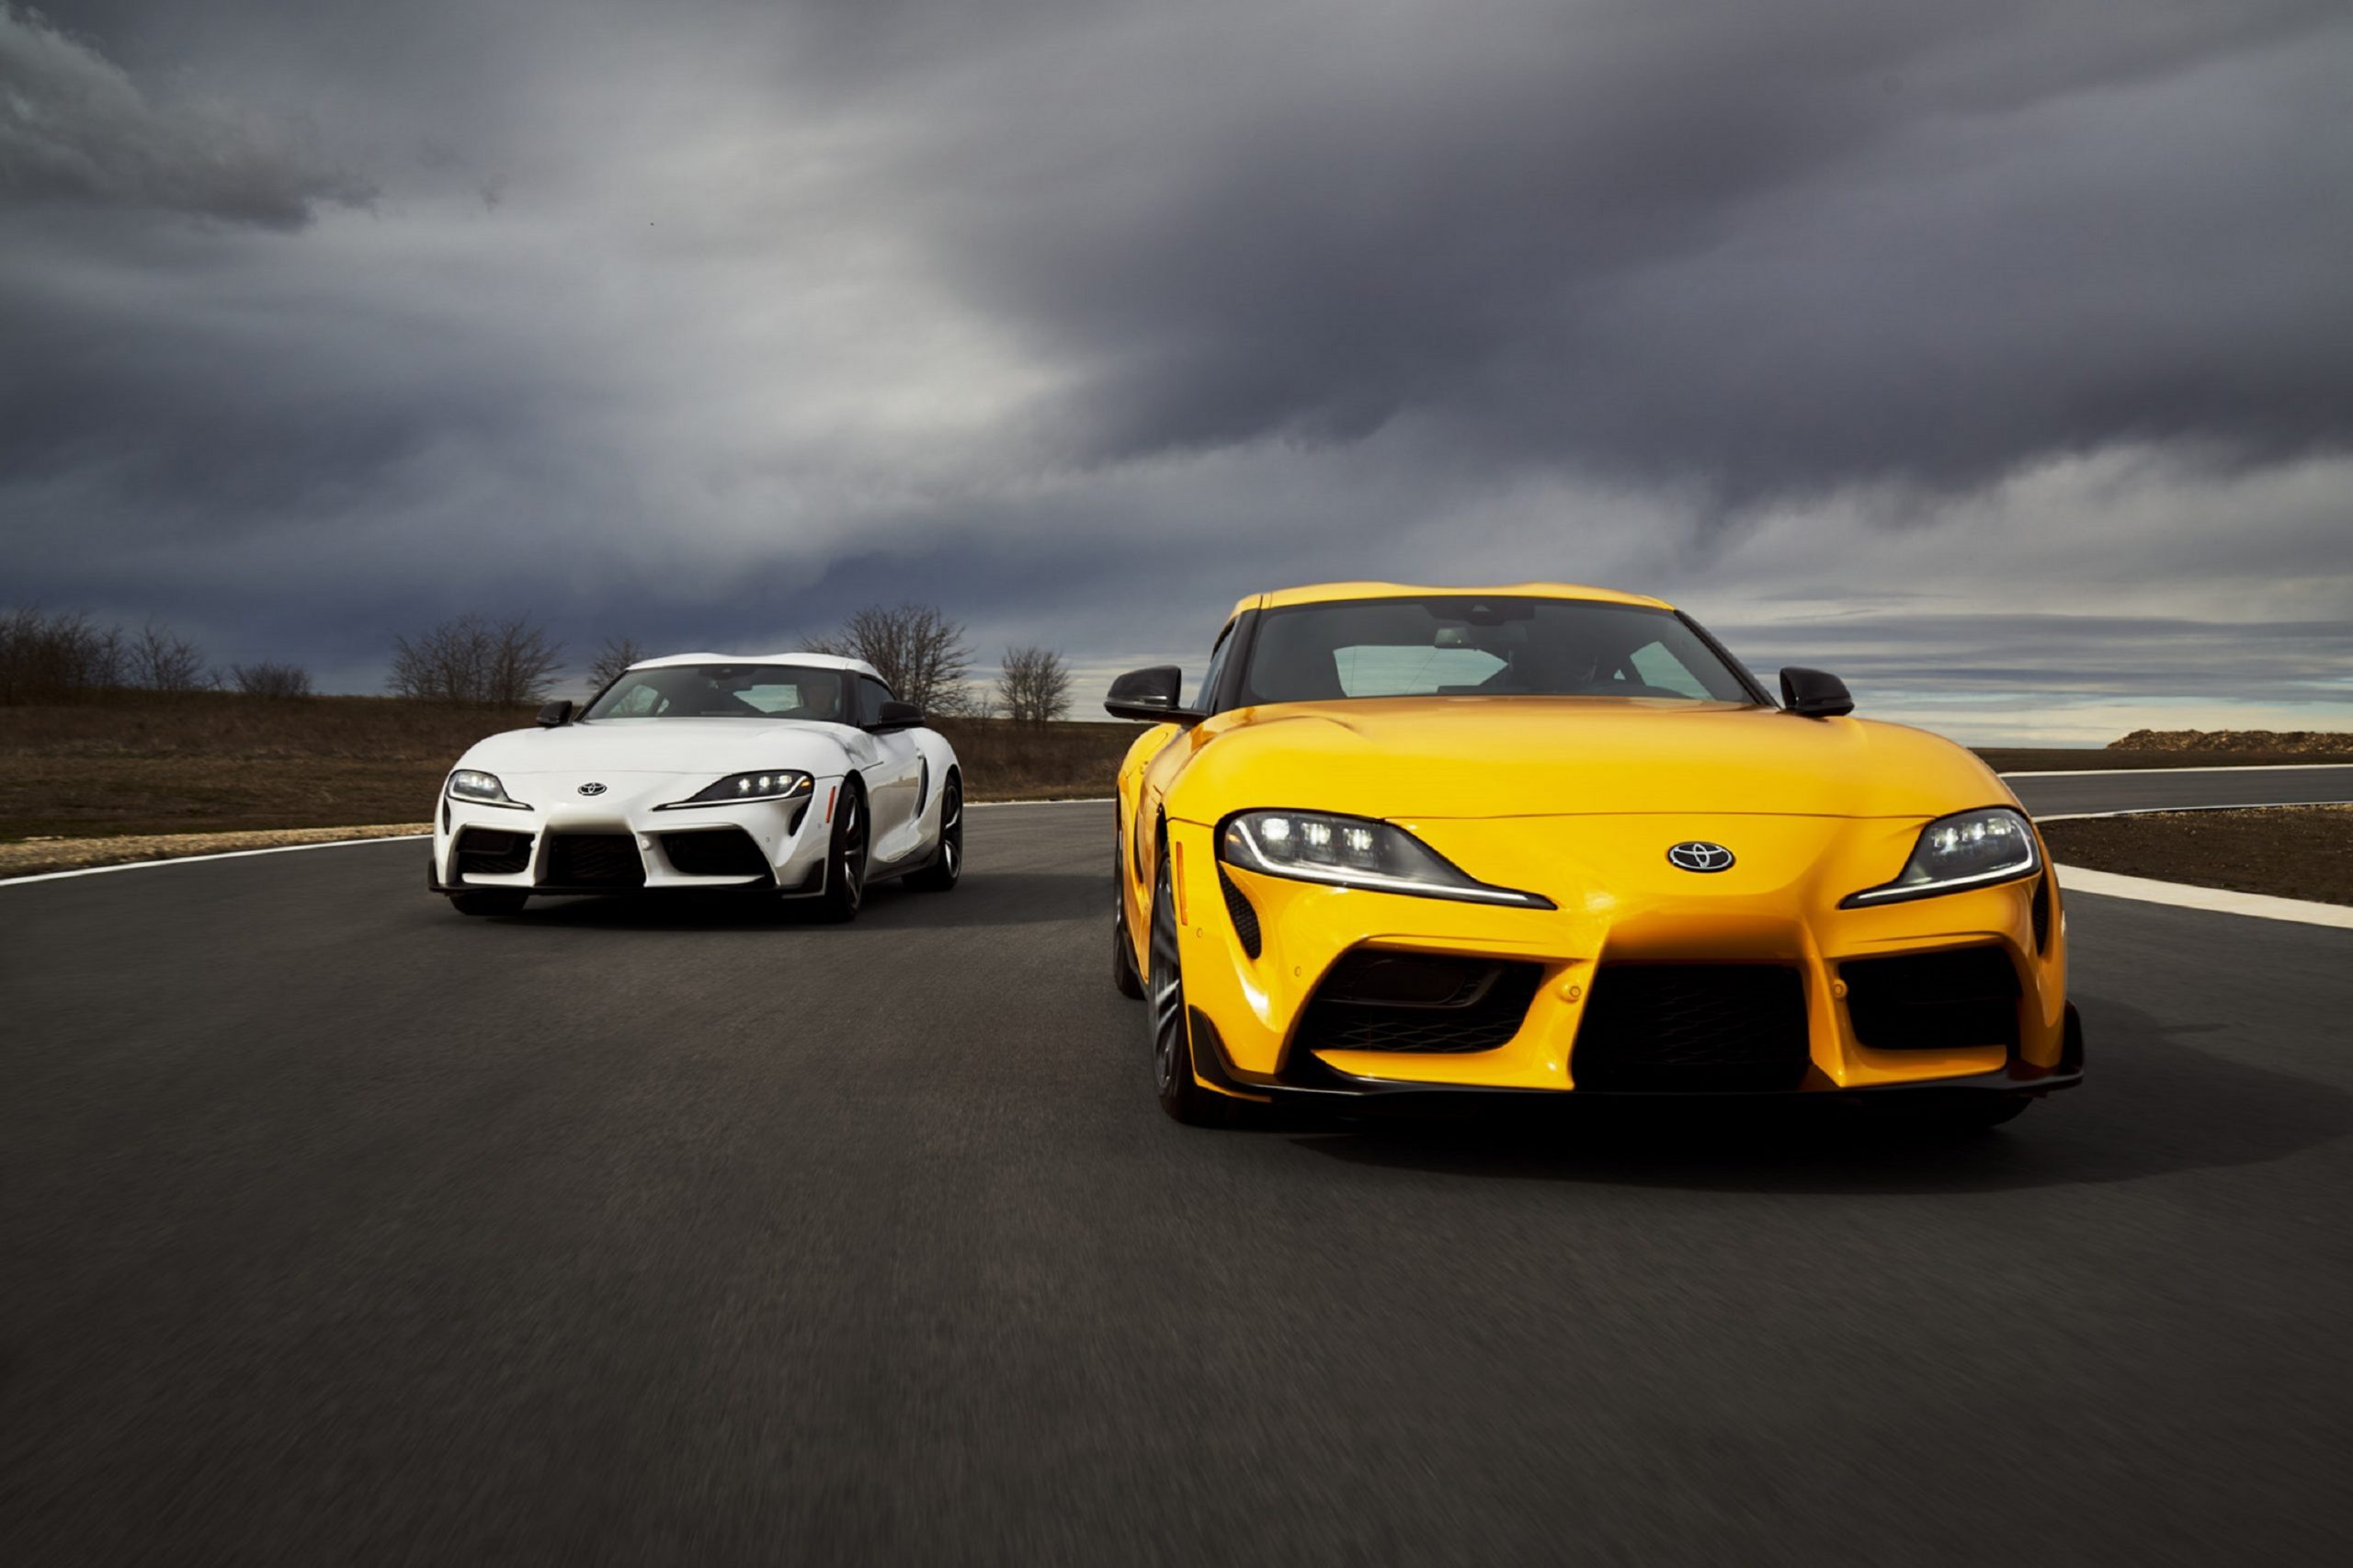 A pair of Toyota Supra sports cars shot from the front on a race track